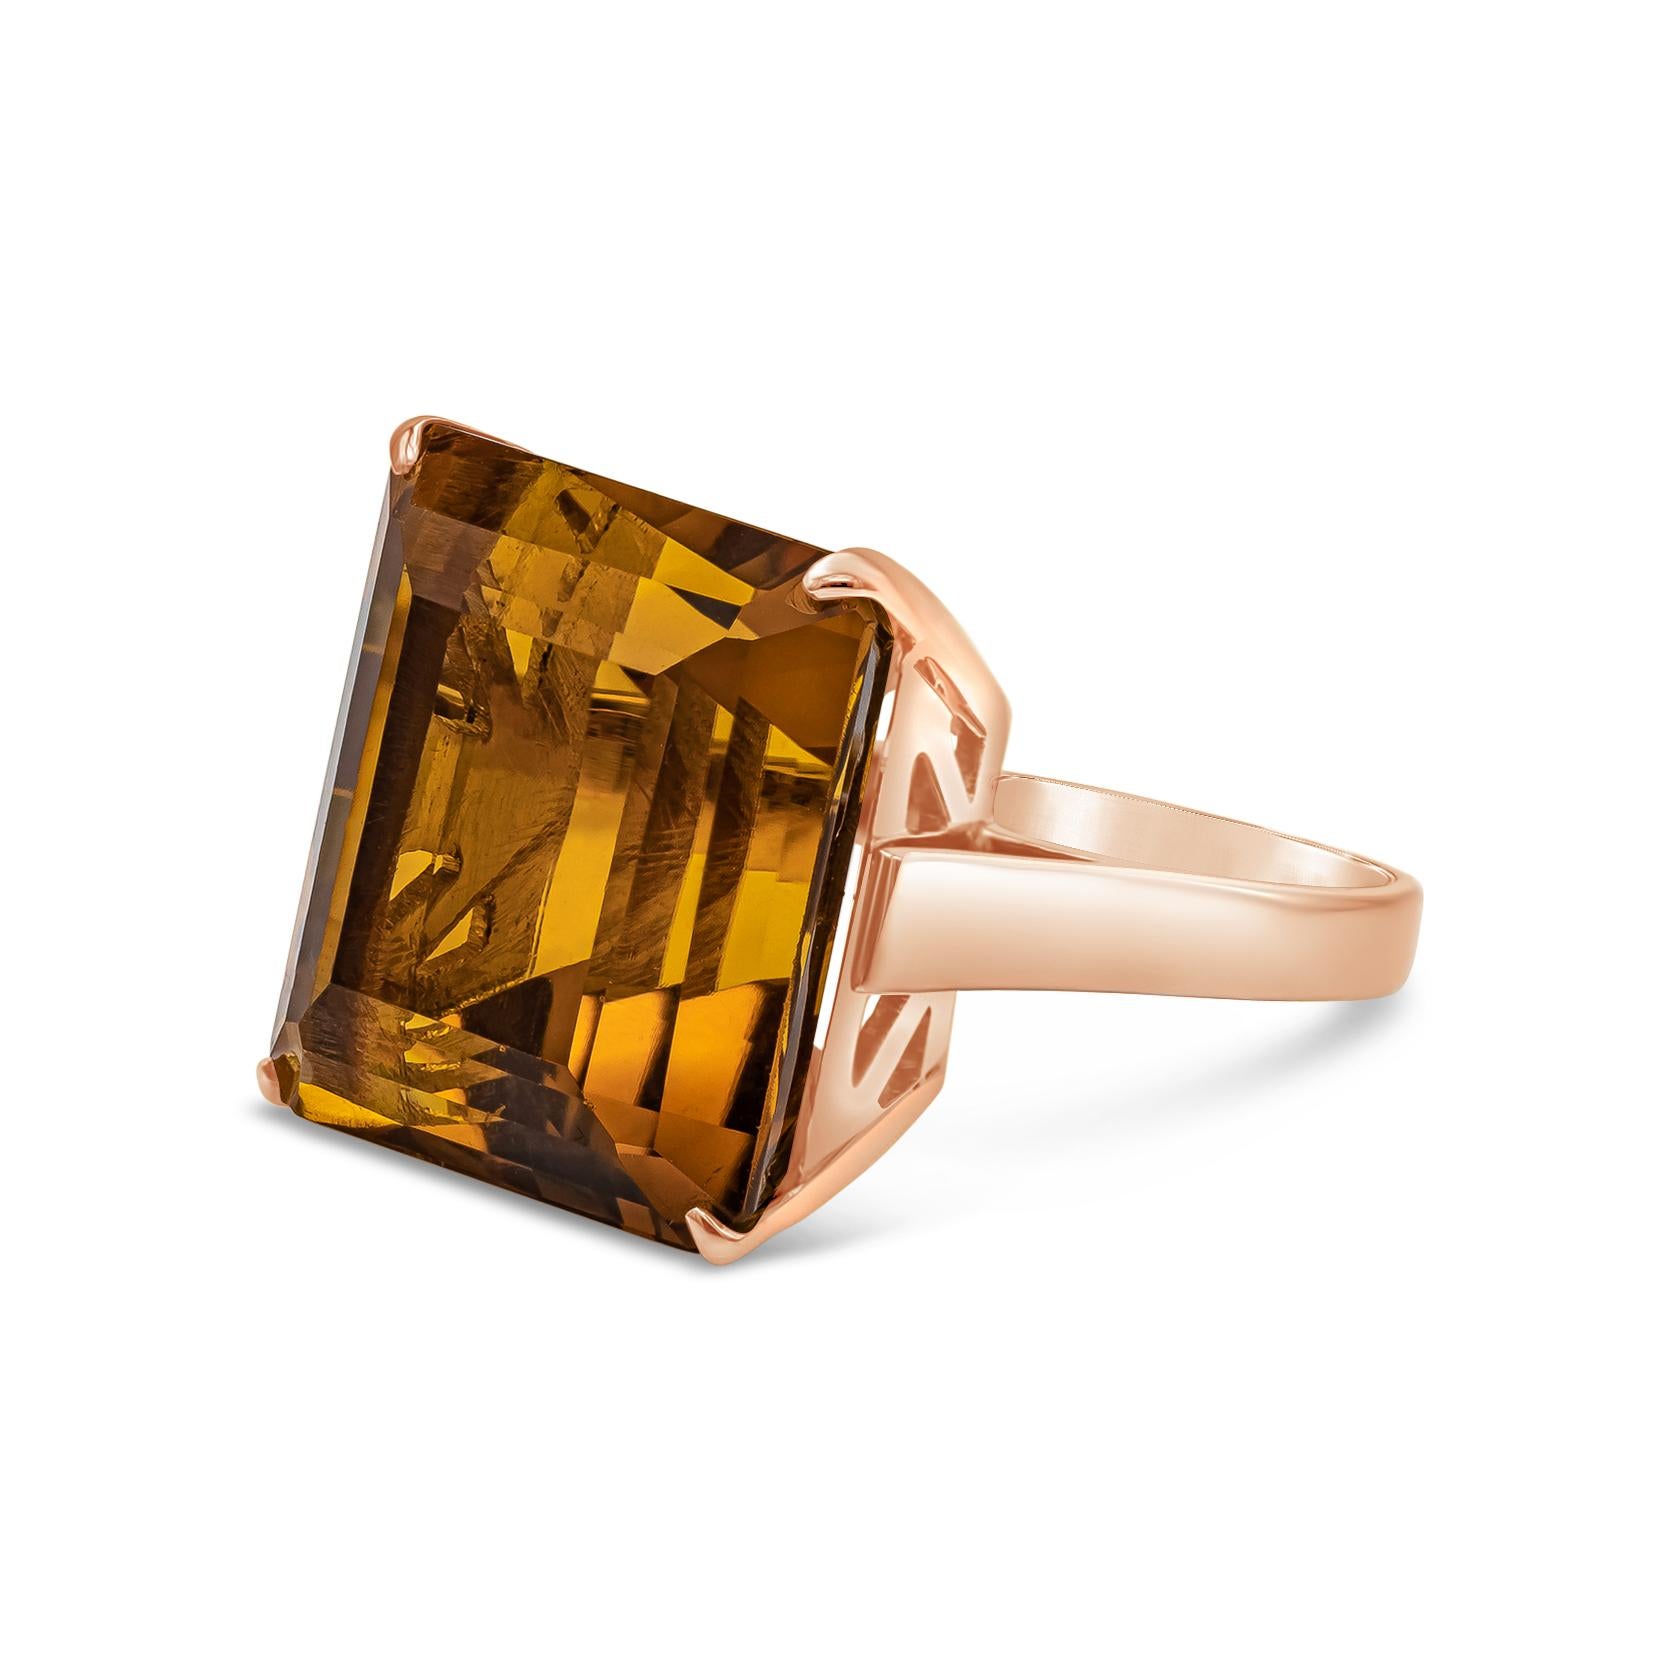 A color-rich cocktail ring showcasing a 24.20 emerald cut citrine set in a polished 14k rose gold. 

